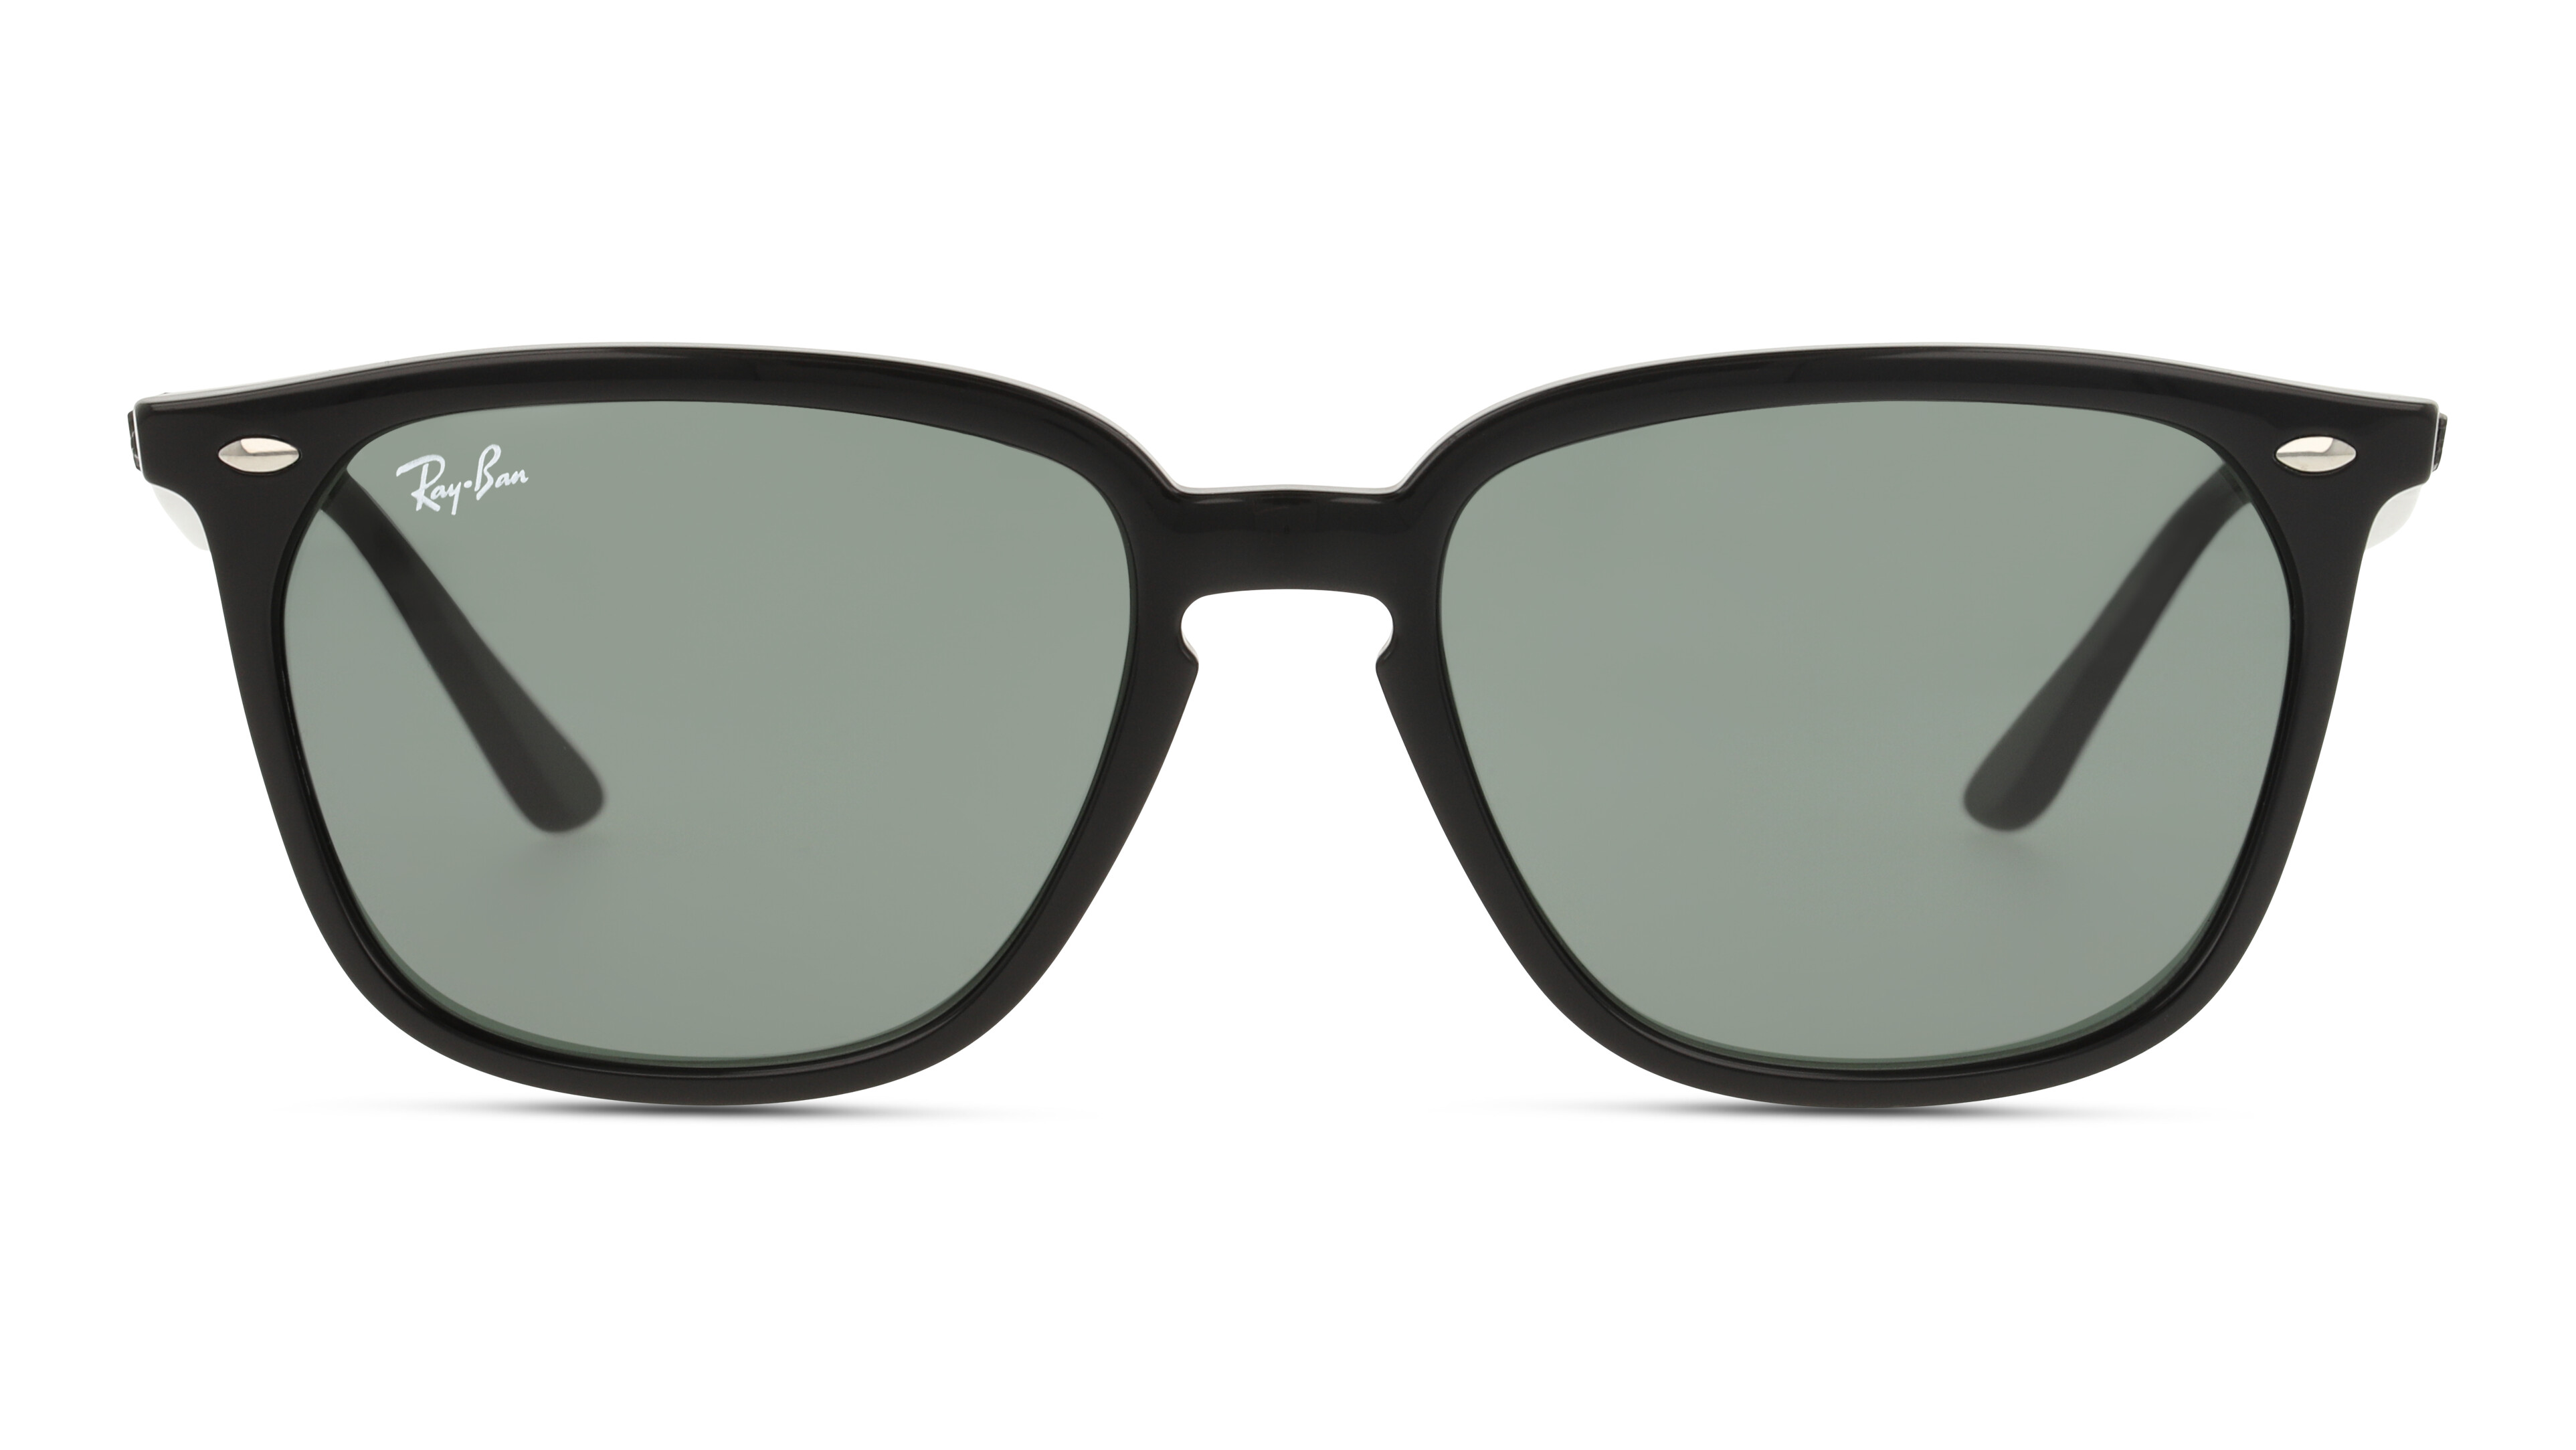 [products.image.front] Ray-Ban 0RB4362 601/71 Sonnenbrille